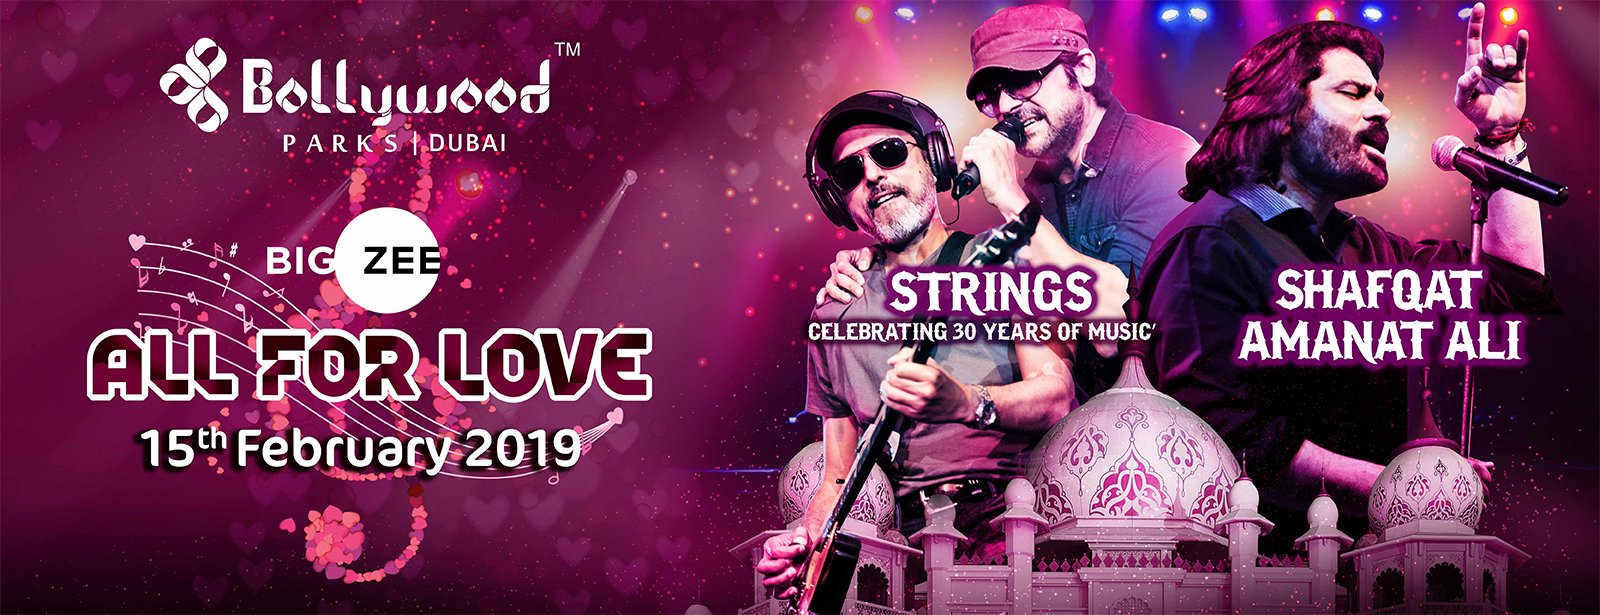 All For Love Concert at Bollywood Parks - Coming Soon in UAE